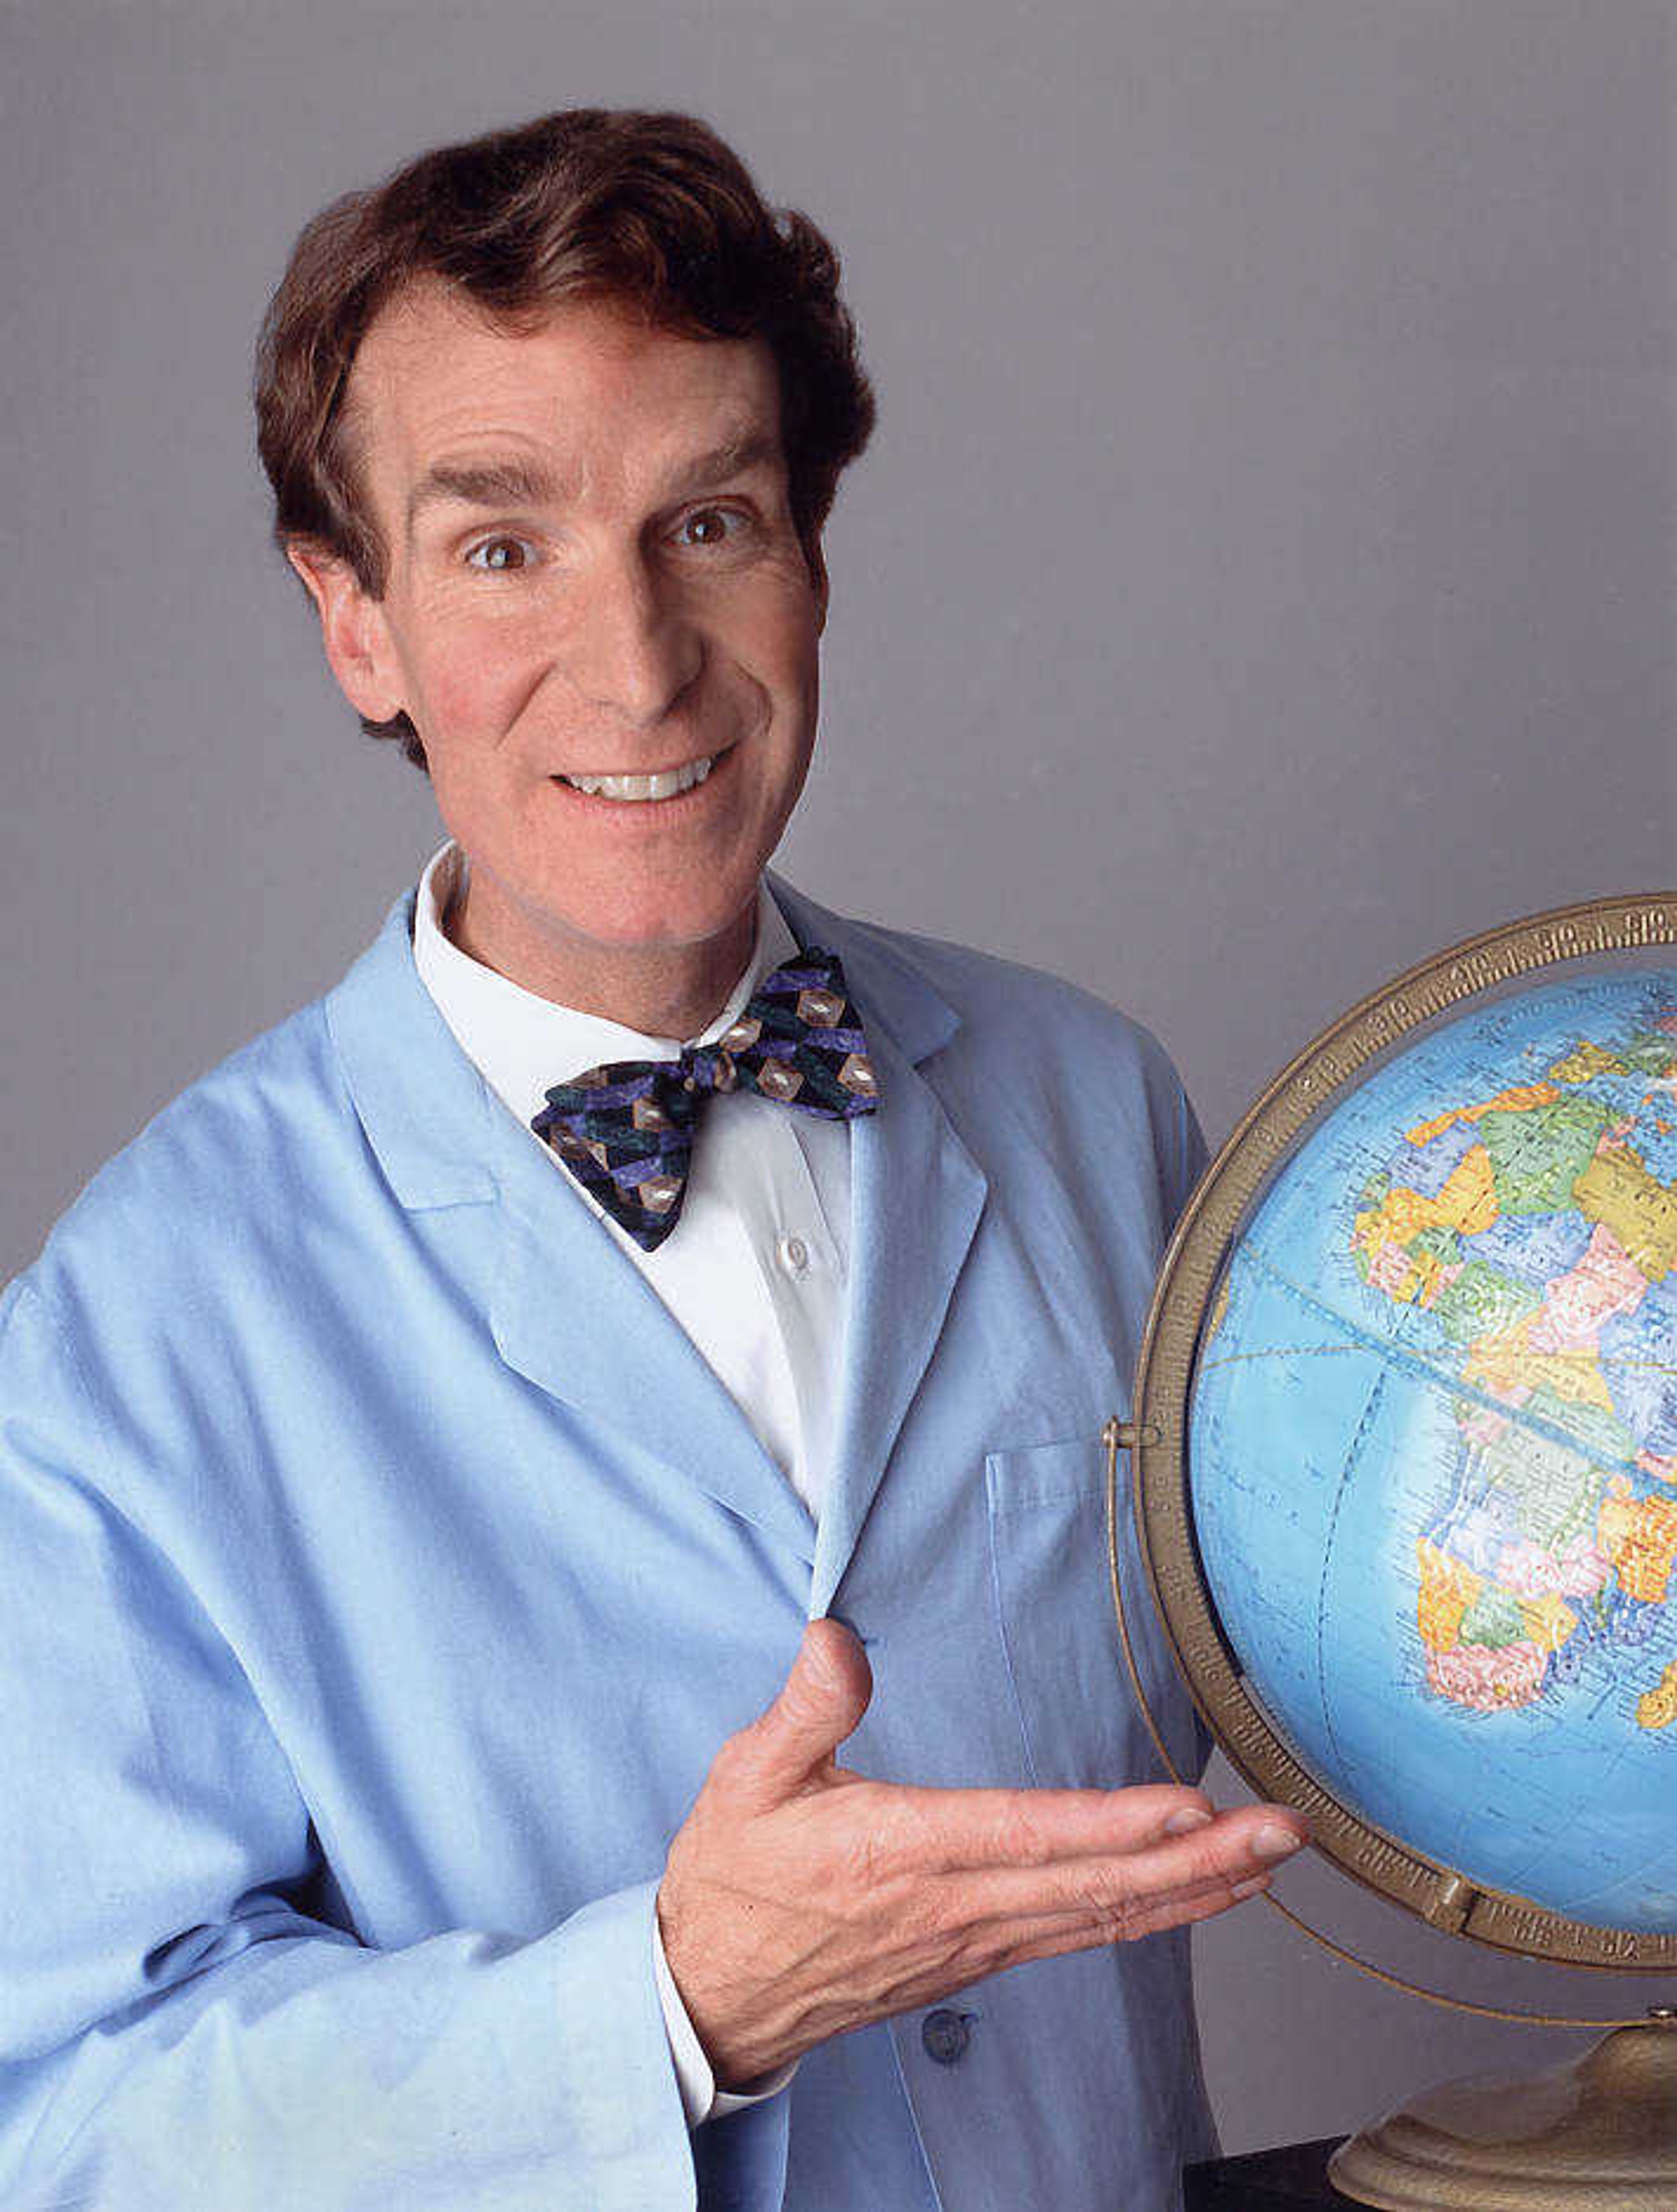 Bill Nye the Science Guy will visit Southeast on April 3. - Submitted Photo